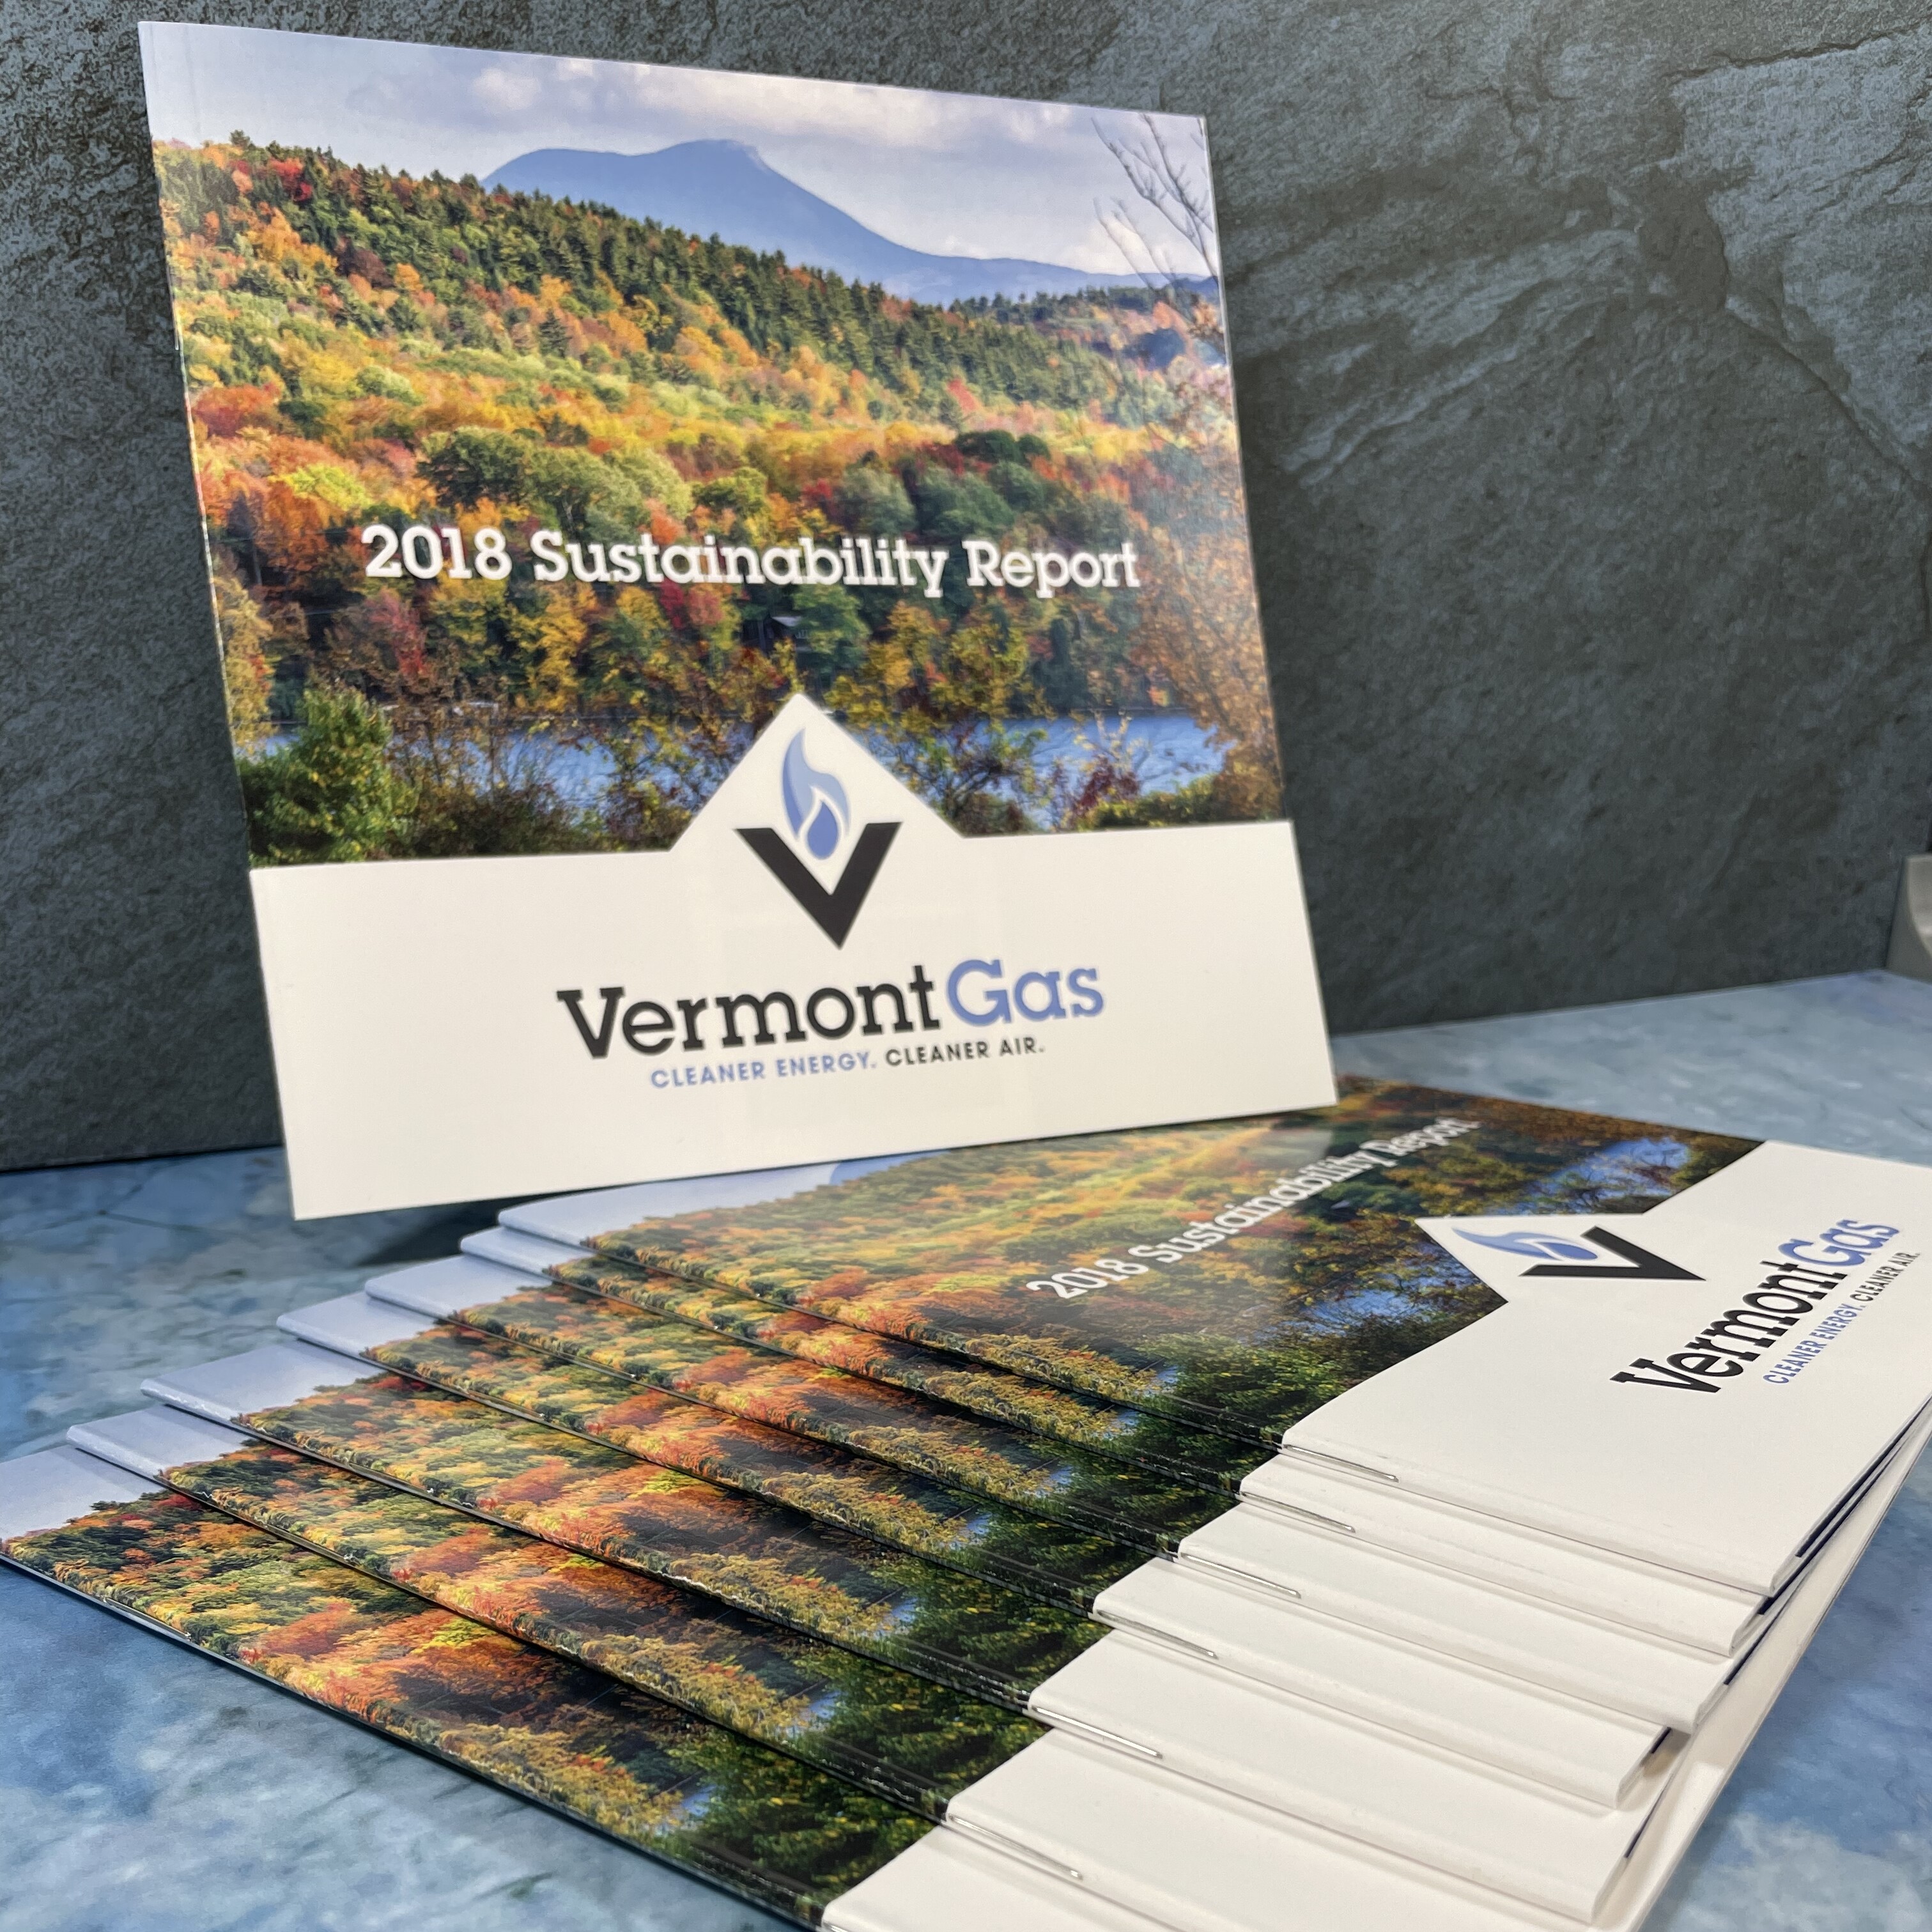 Sustainability Report for Vermont Gas